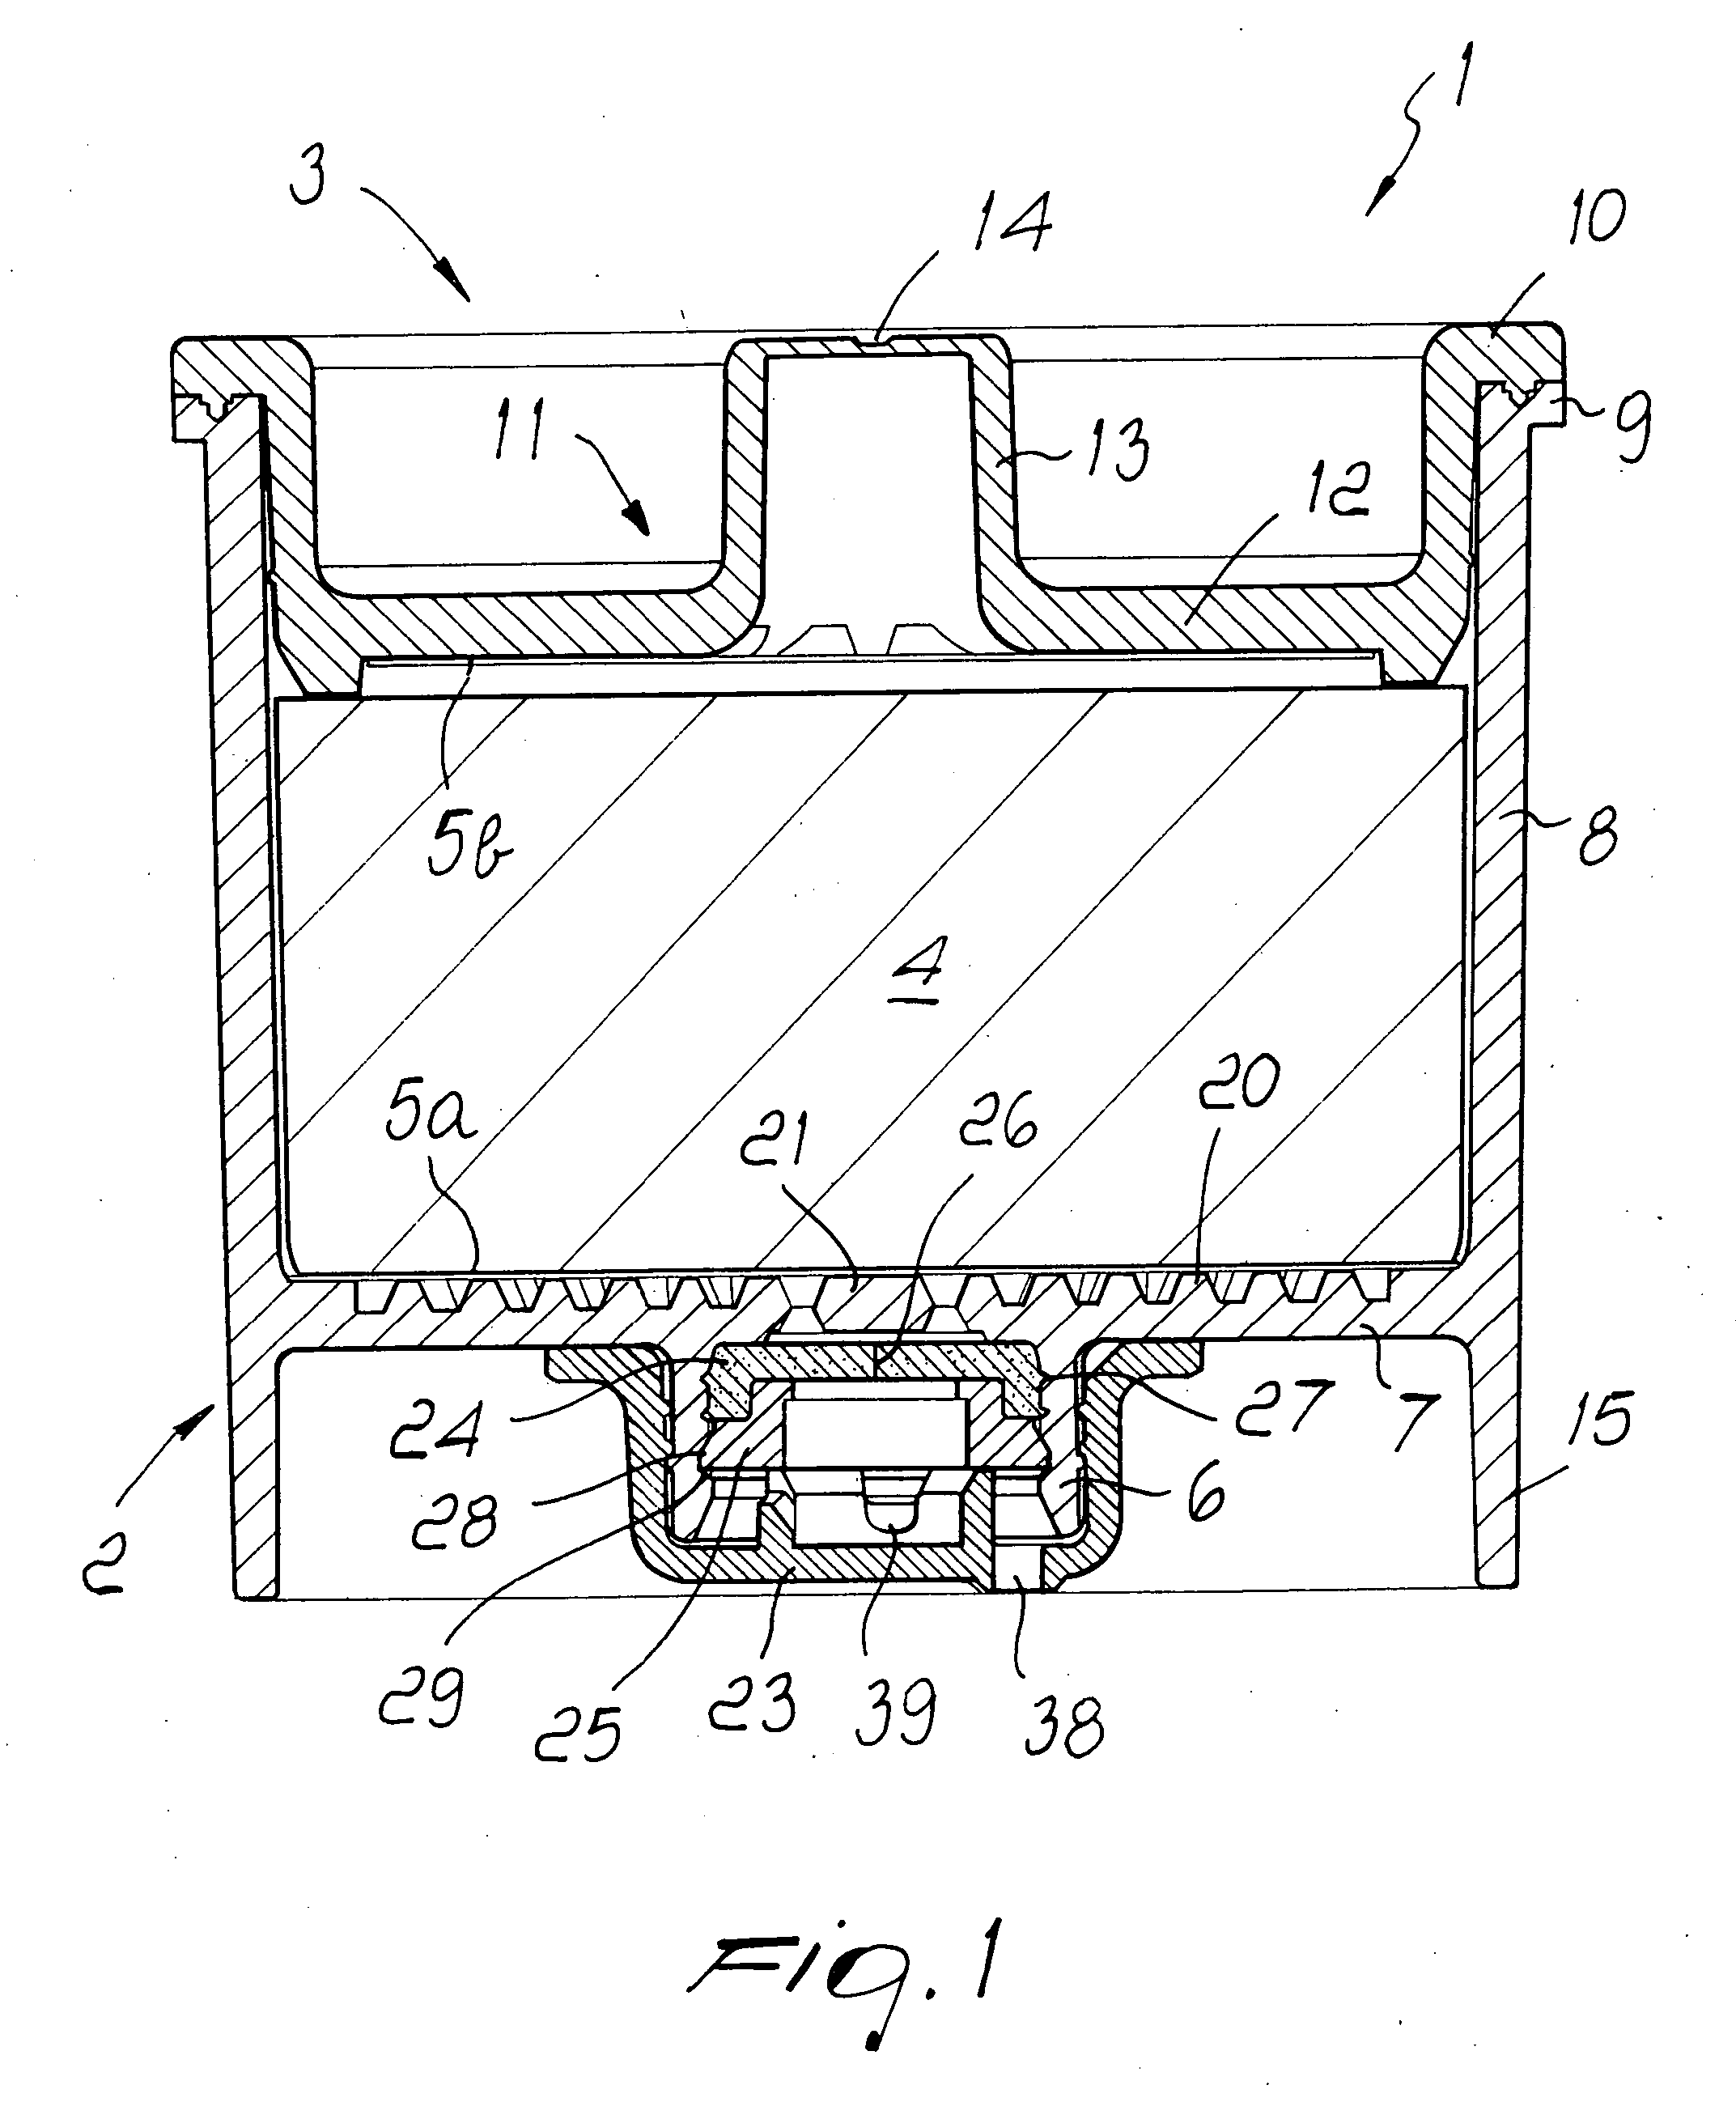 Integrated cartridge containing a substance for extracting a beverage